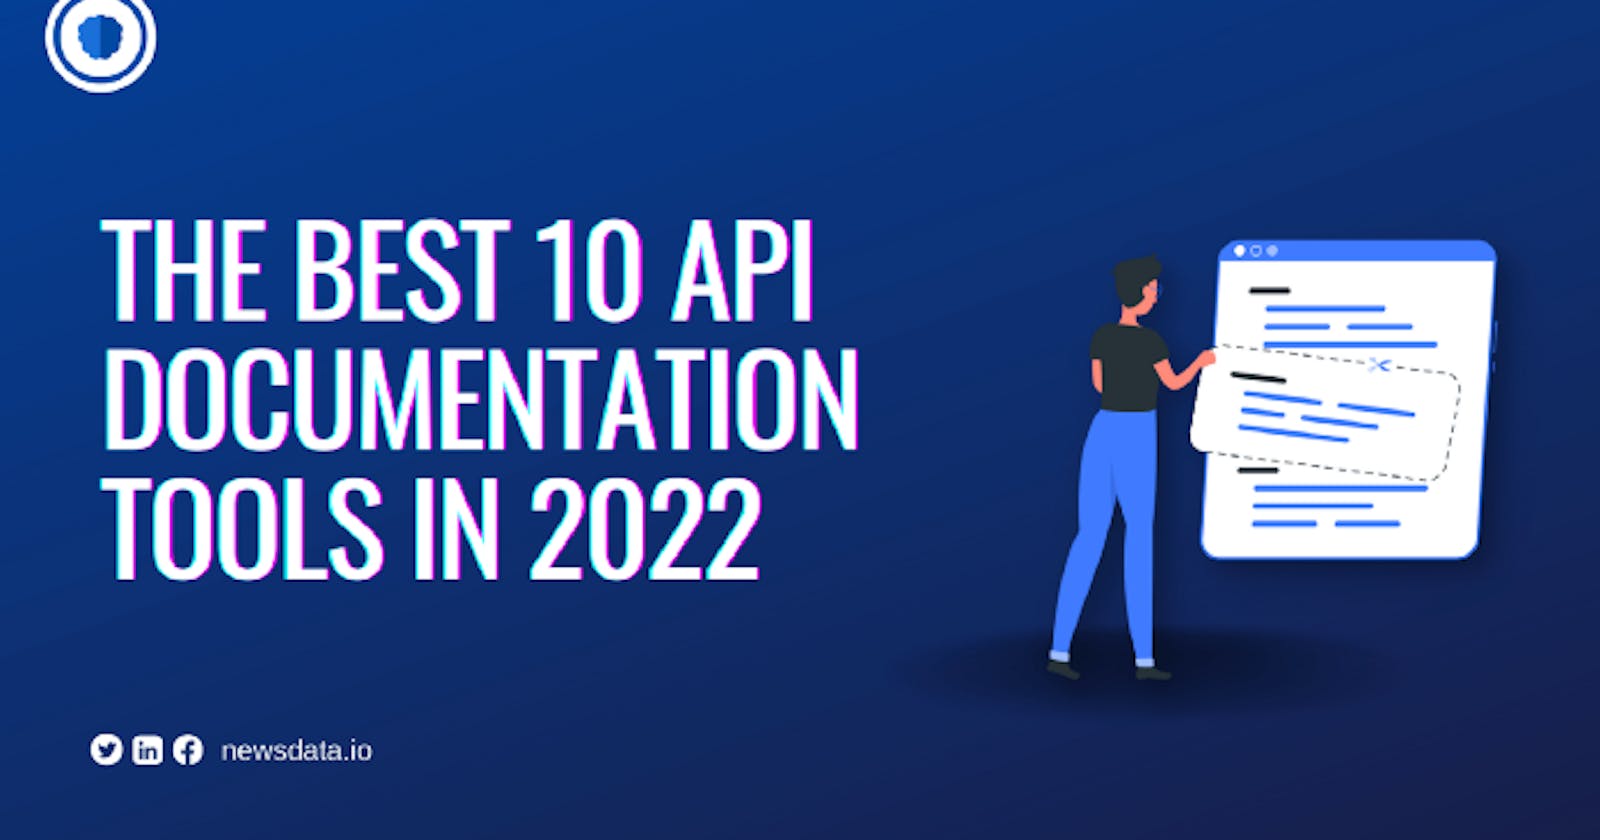 The Best 10 API documentation tools in 2022